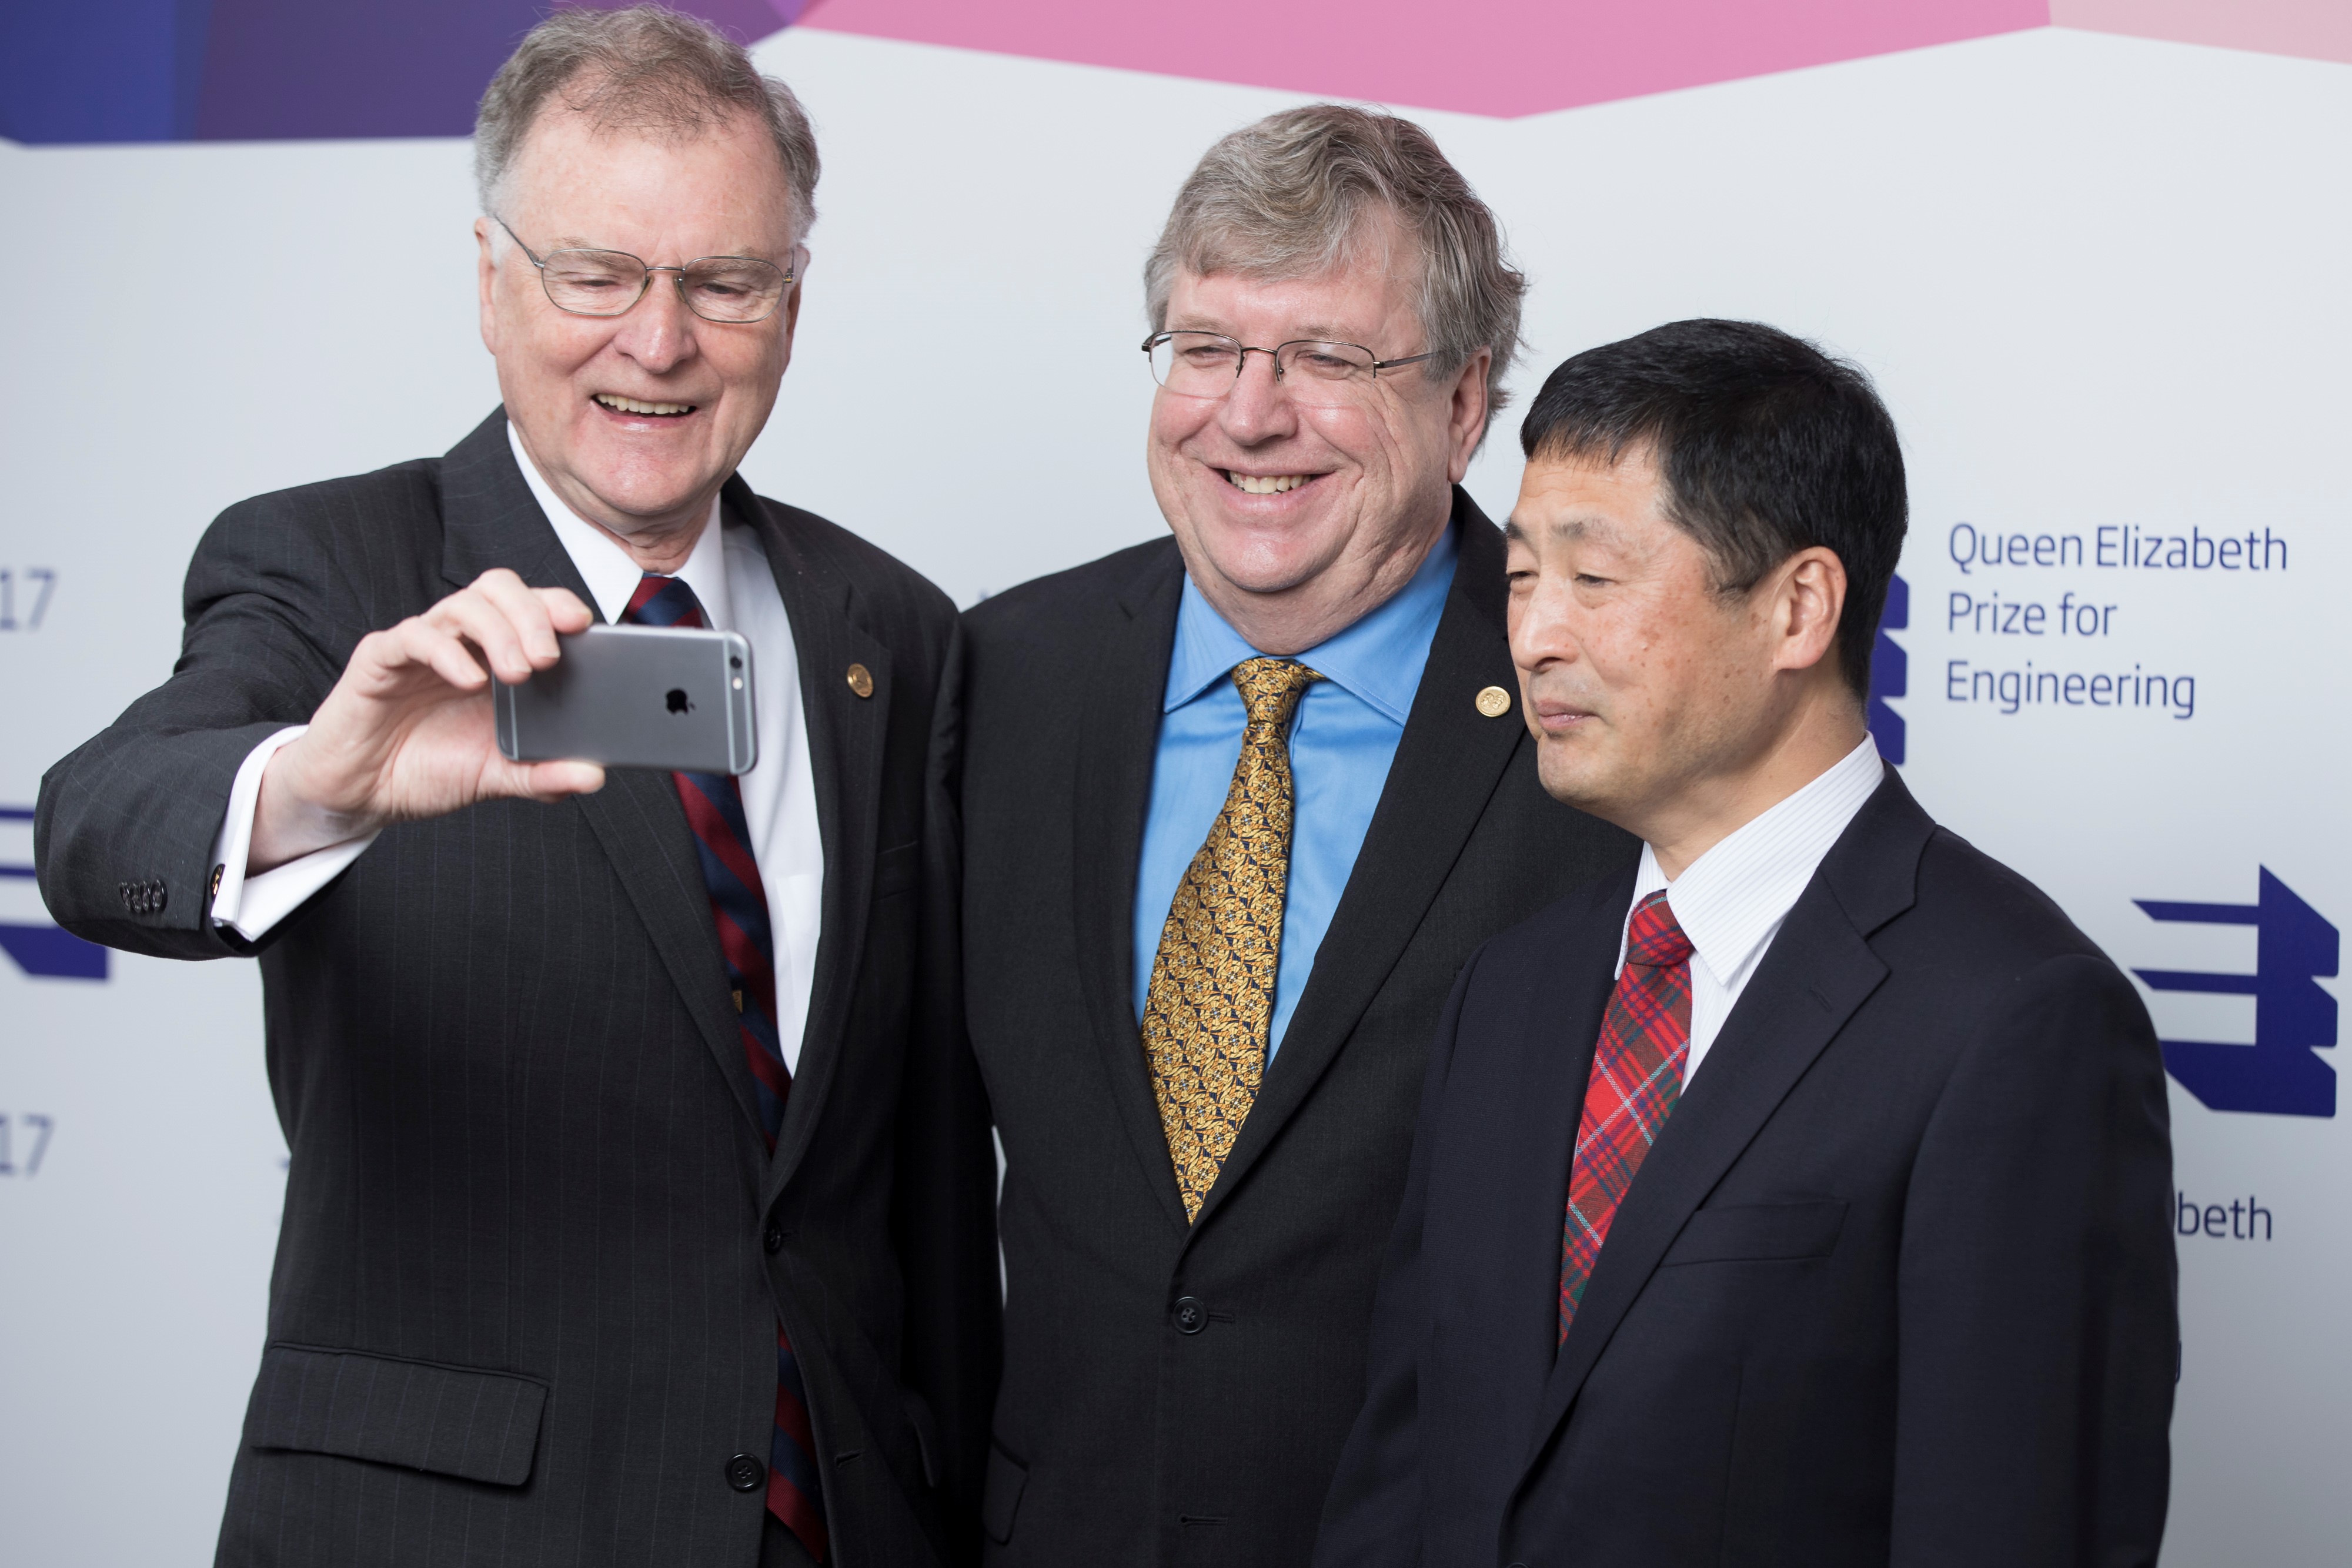 Winners of the Queen Elizabeth Prize for Engineering announced in London today, (L-R)  Michael Tompsett (UK) Nobukazu Teranishi (Japan) and Eric Fossum (USA). Along with George Smith (USA) they will share the £1million prize for combined contribution to digital imaging (FTP Edelman)